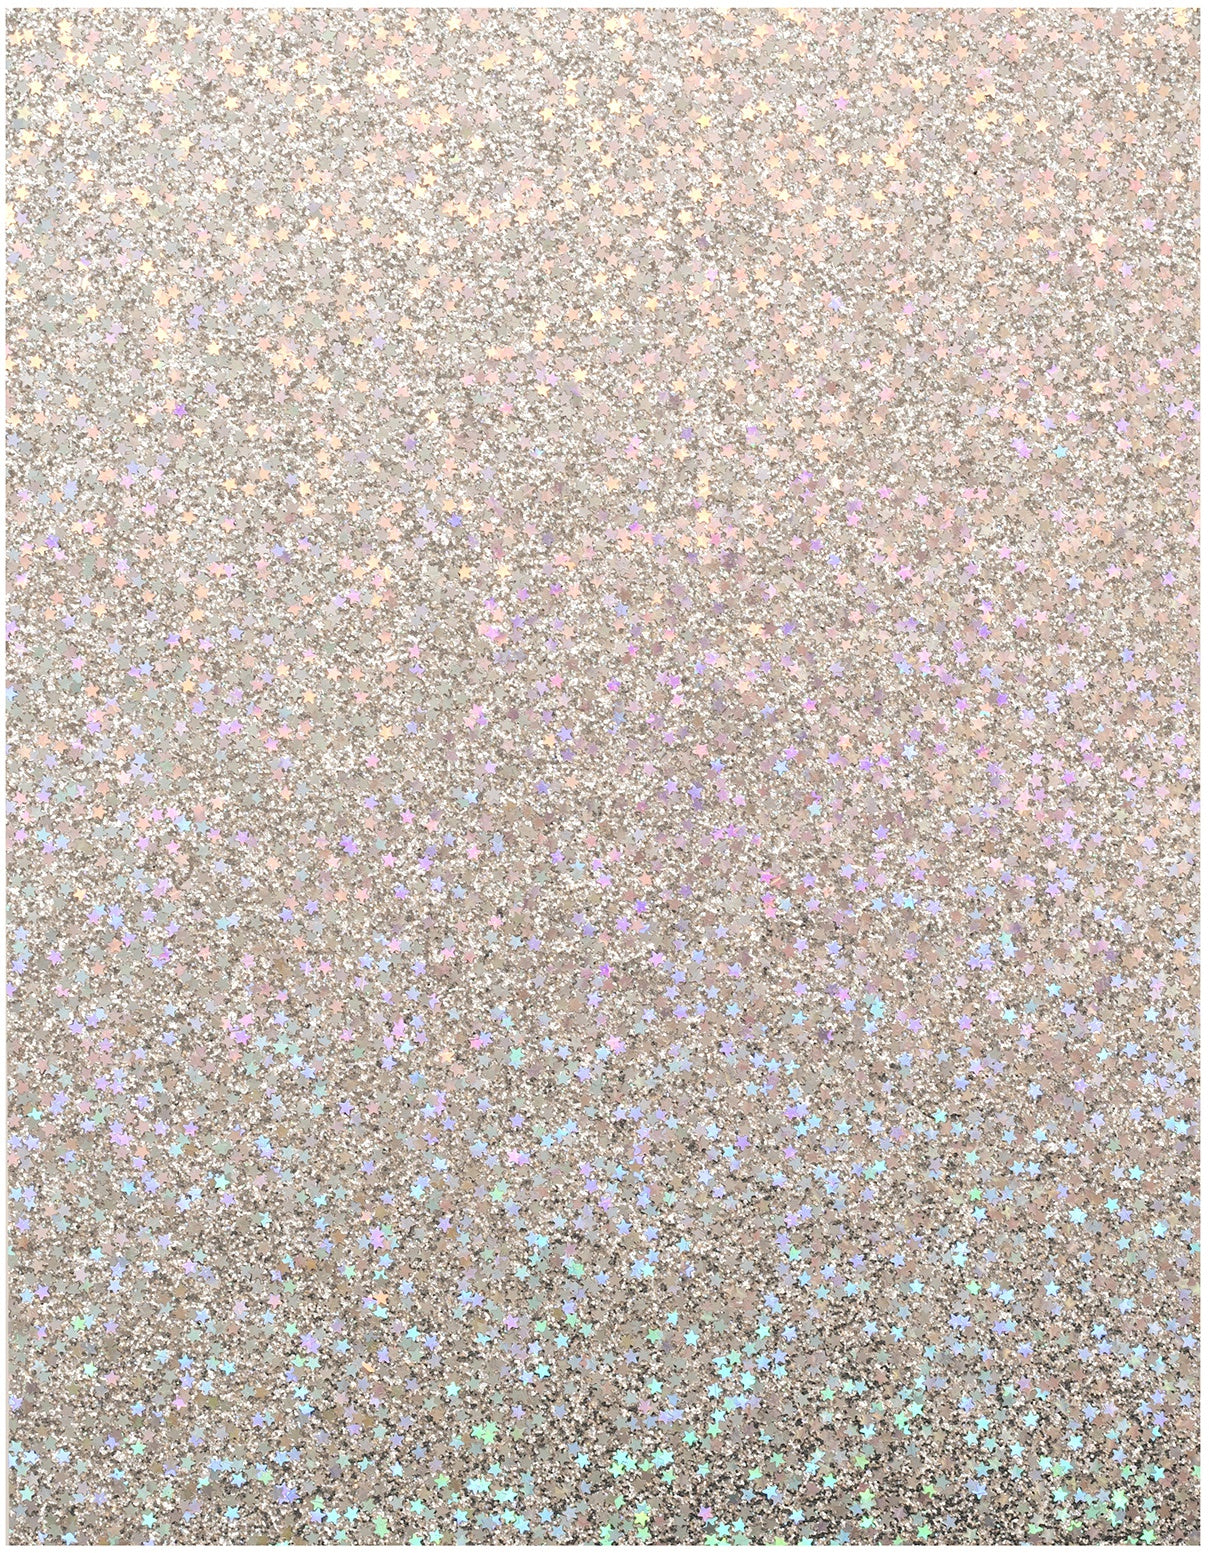 8 Sparkle Chunky CMYK Glitter Papers 12x12 Instant Download Commercial Use  300 Dpi Planner Paper Scrapbook Luxury Glitter Texture Paper 